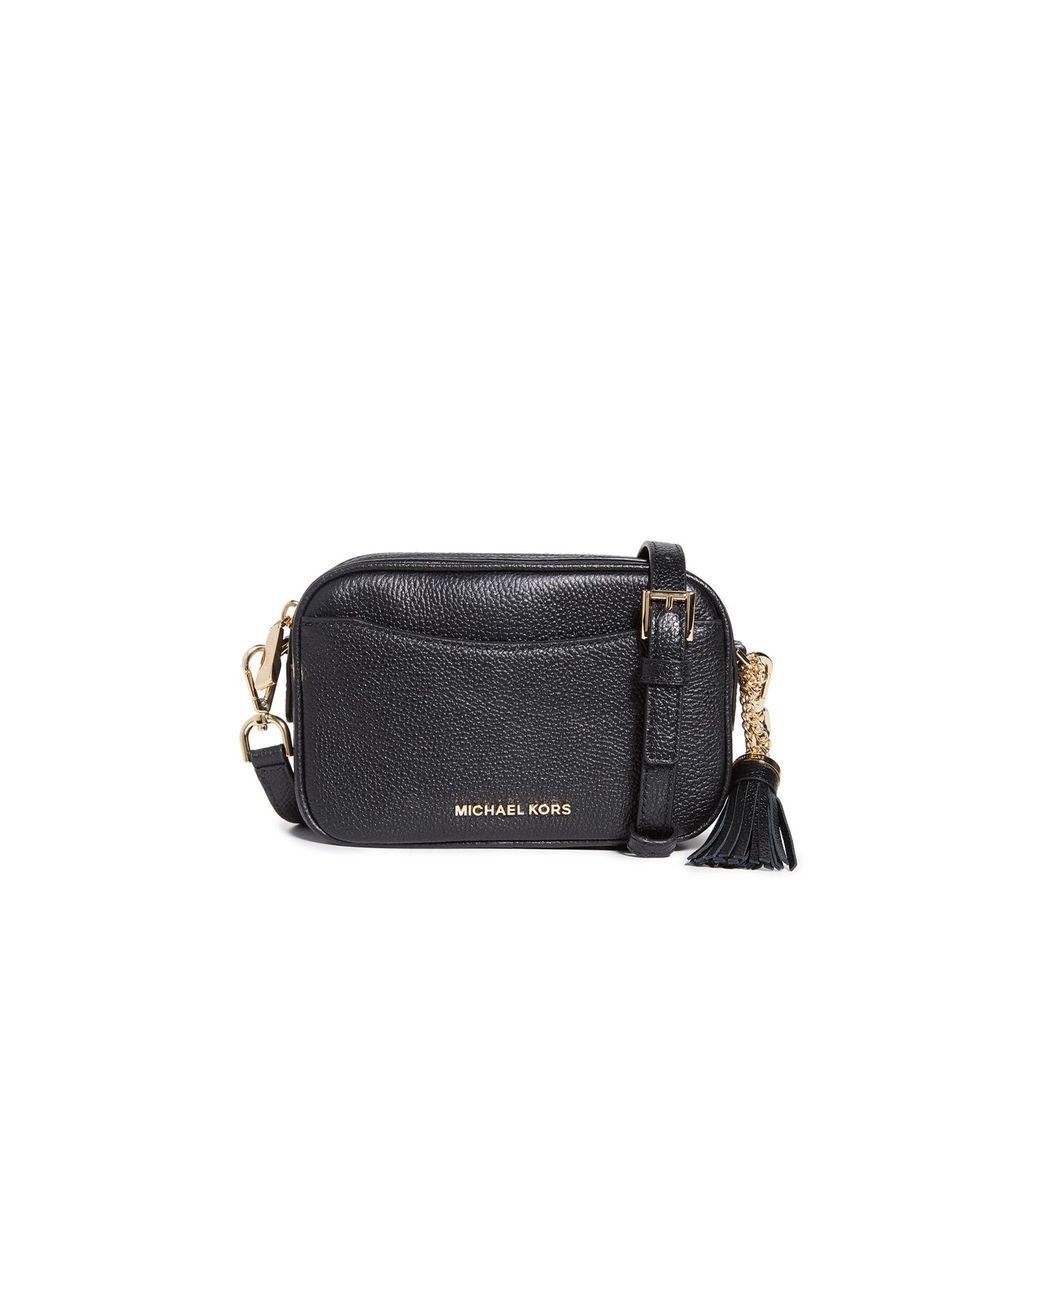 Michael Kors Belt Bag Gold - $60 (31% Off Retail) New With Tags - From Saria